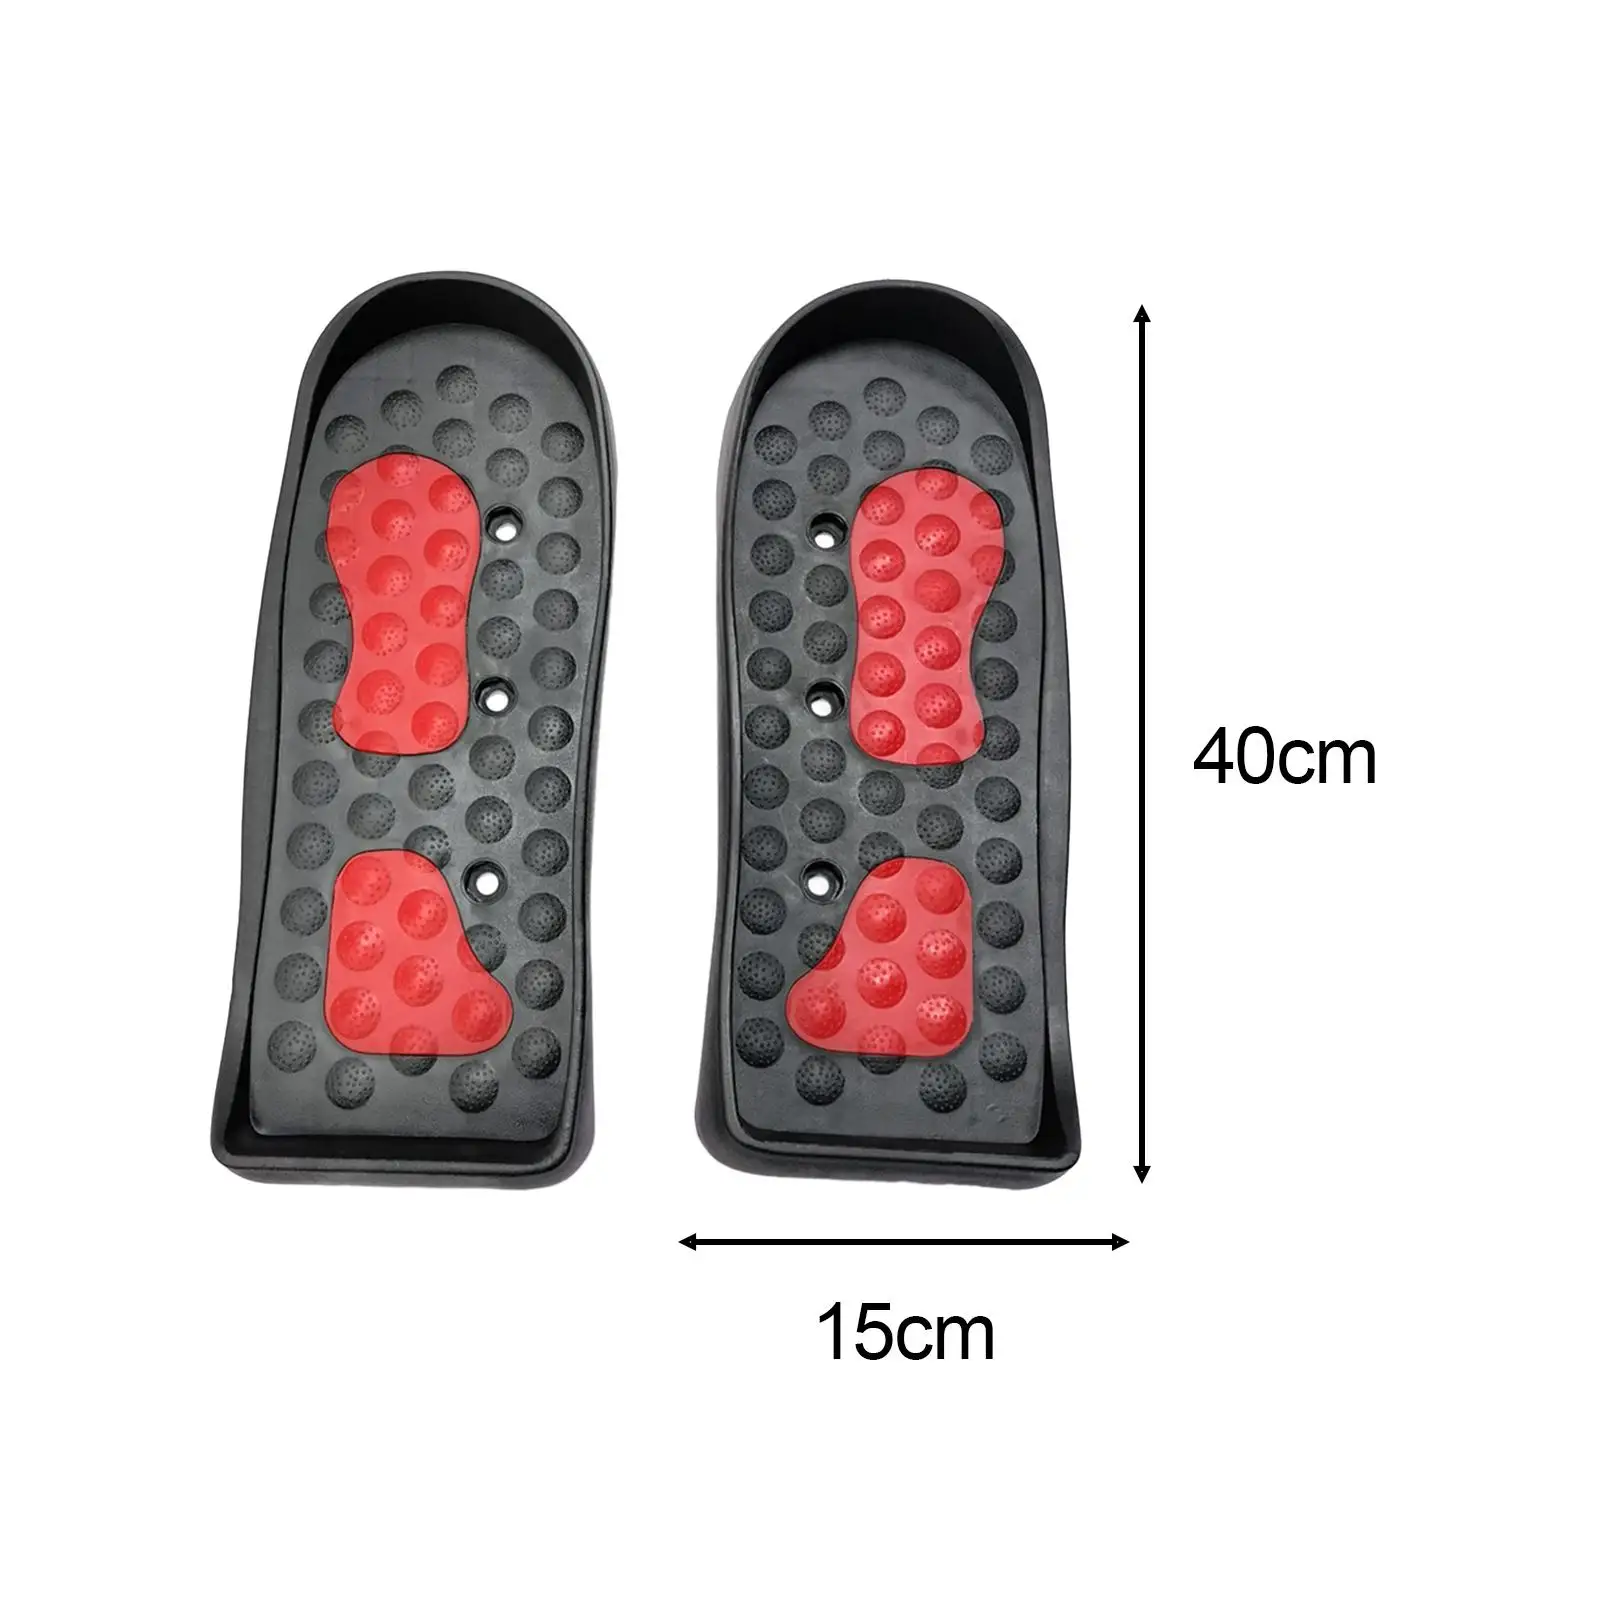 

2x Elliptical Trainer Pedals Replacement Supplies Easy to Install Foot Pedal for Fitness Sports Office Gym Home Cardio Training